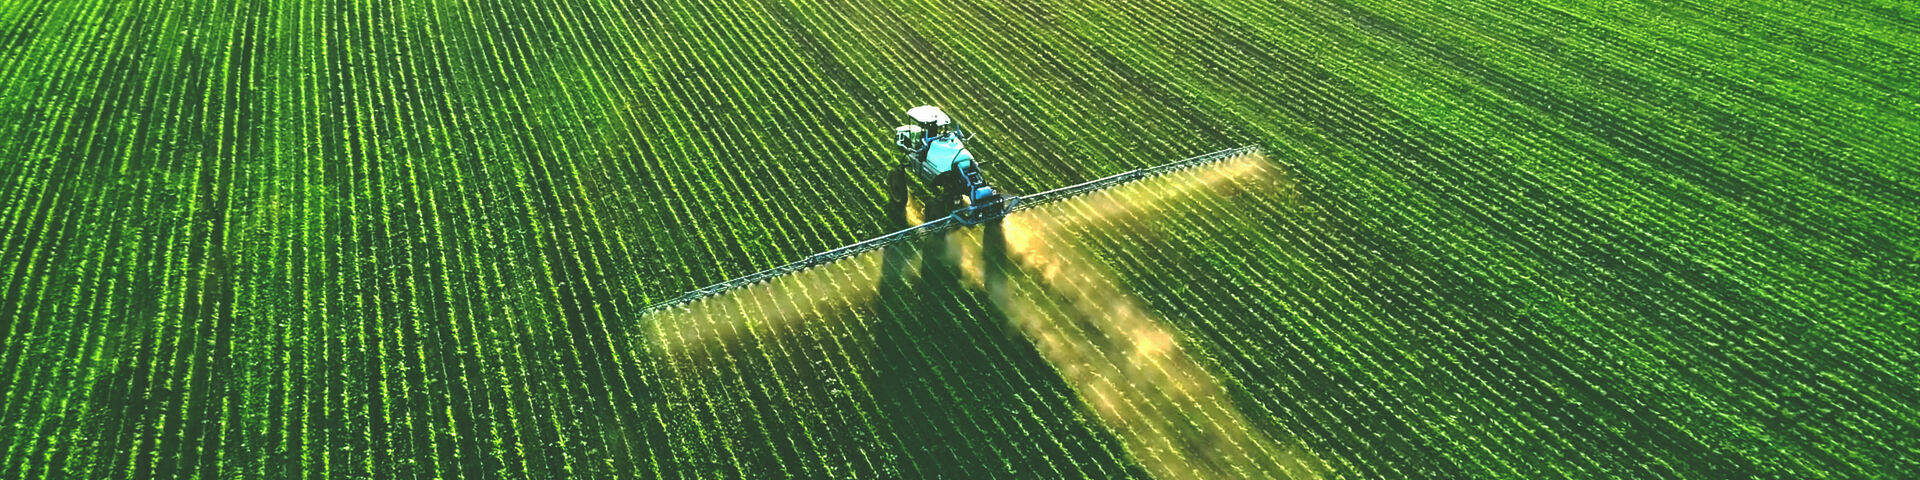 tractor spraying on field